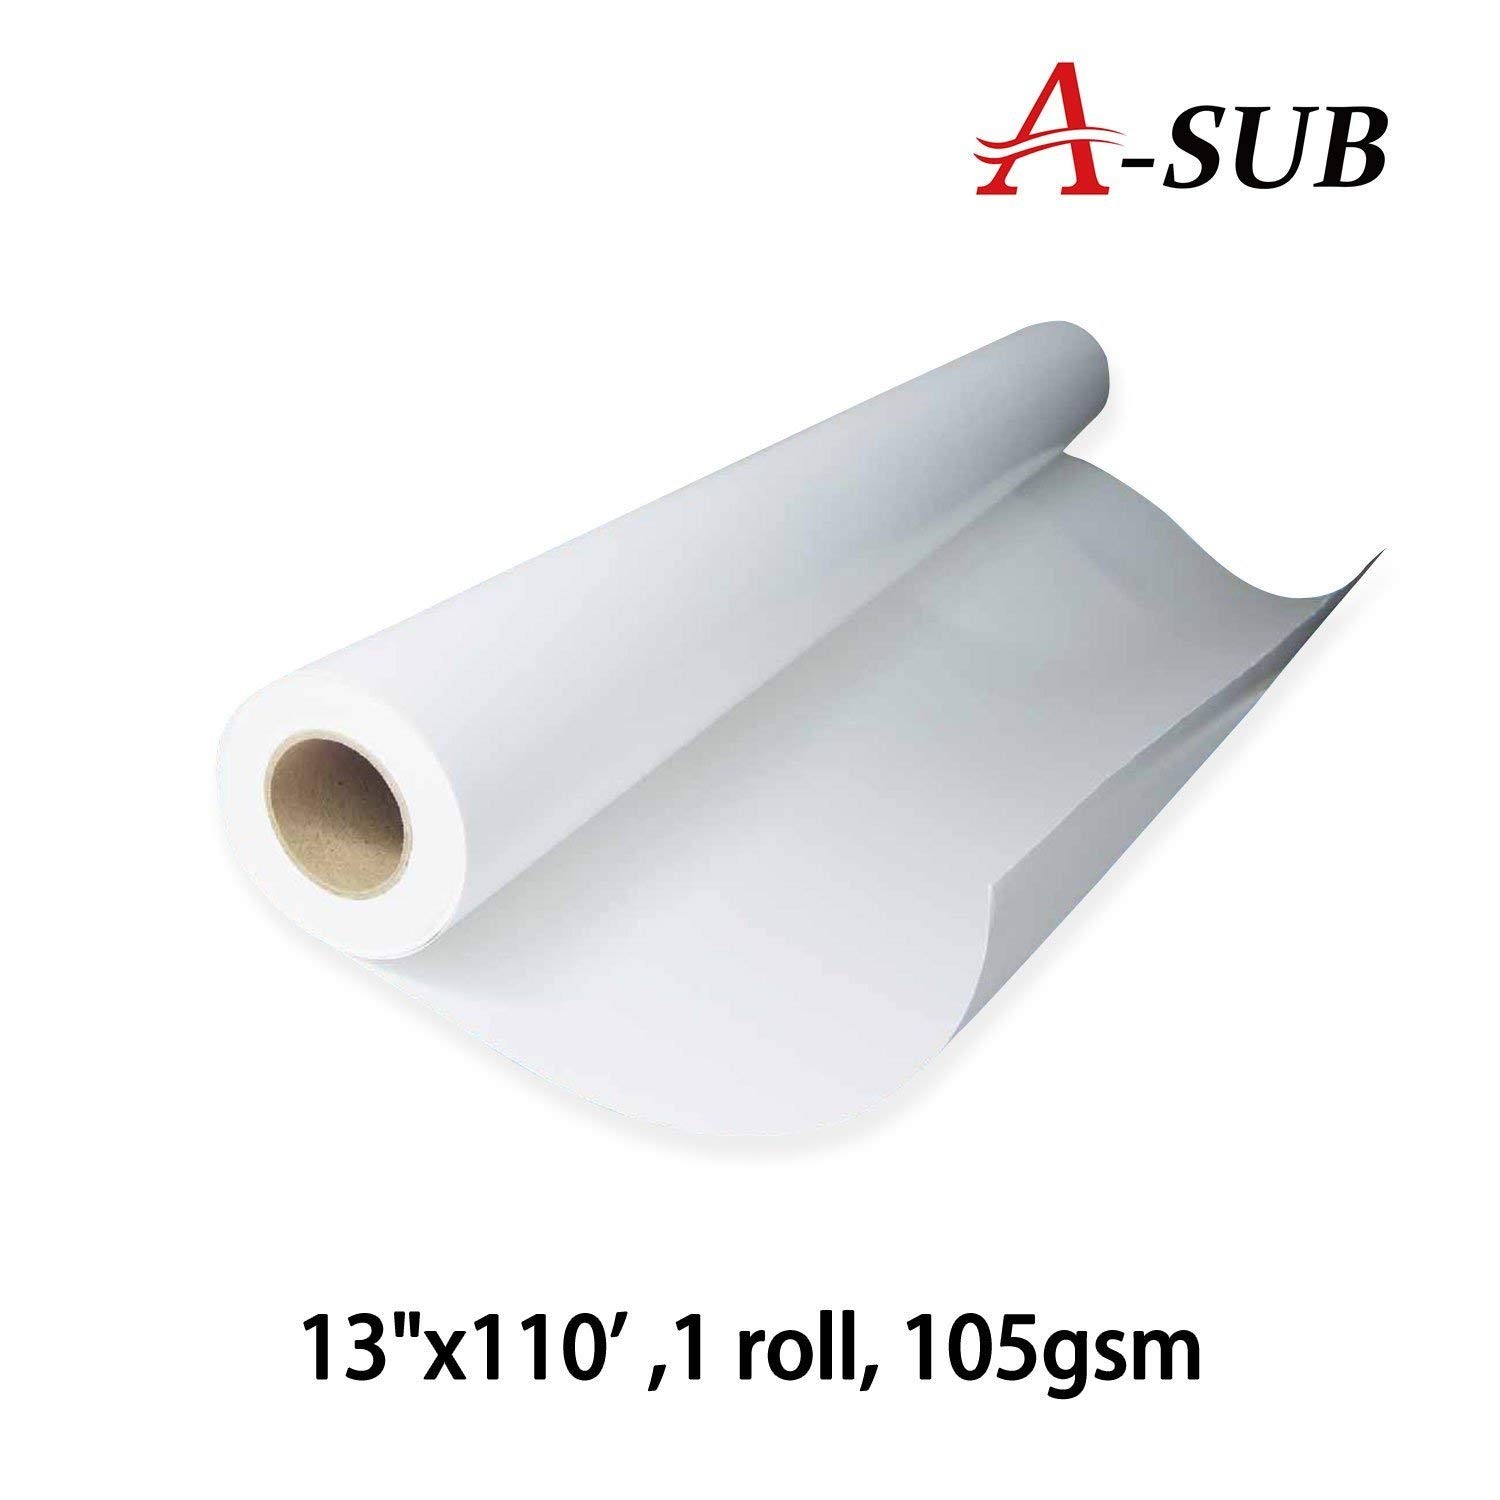 A-SUB Sublimation Paper 13x110'/13x300', 105gsm roll size